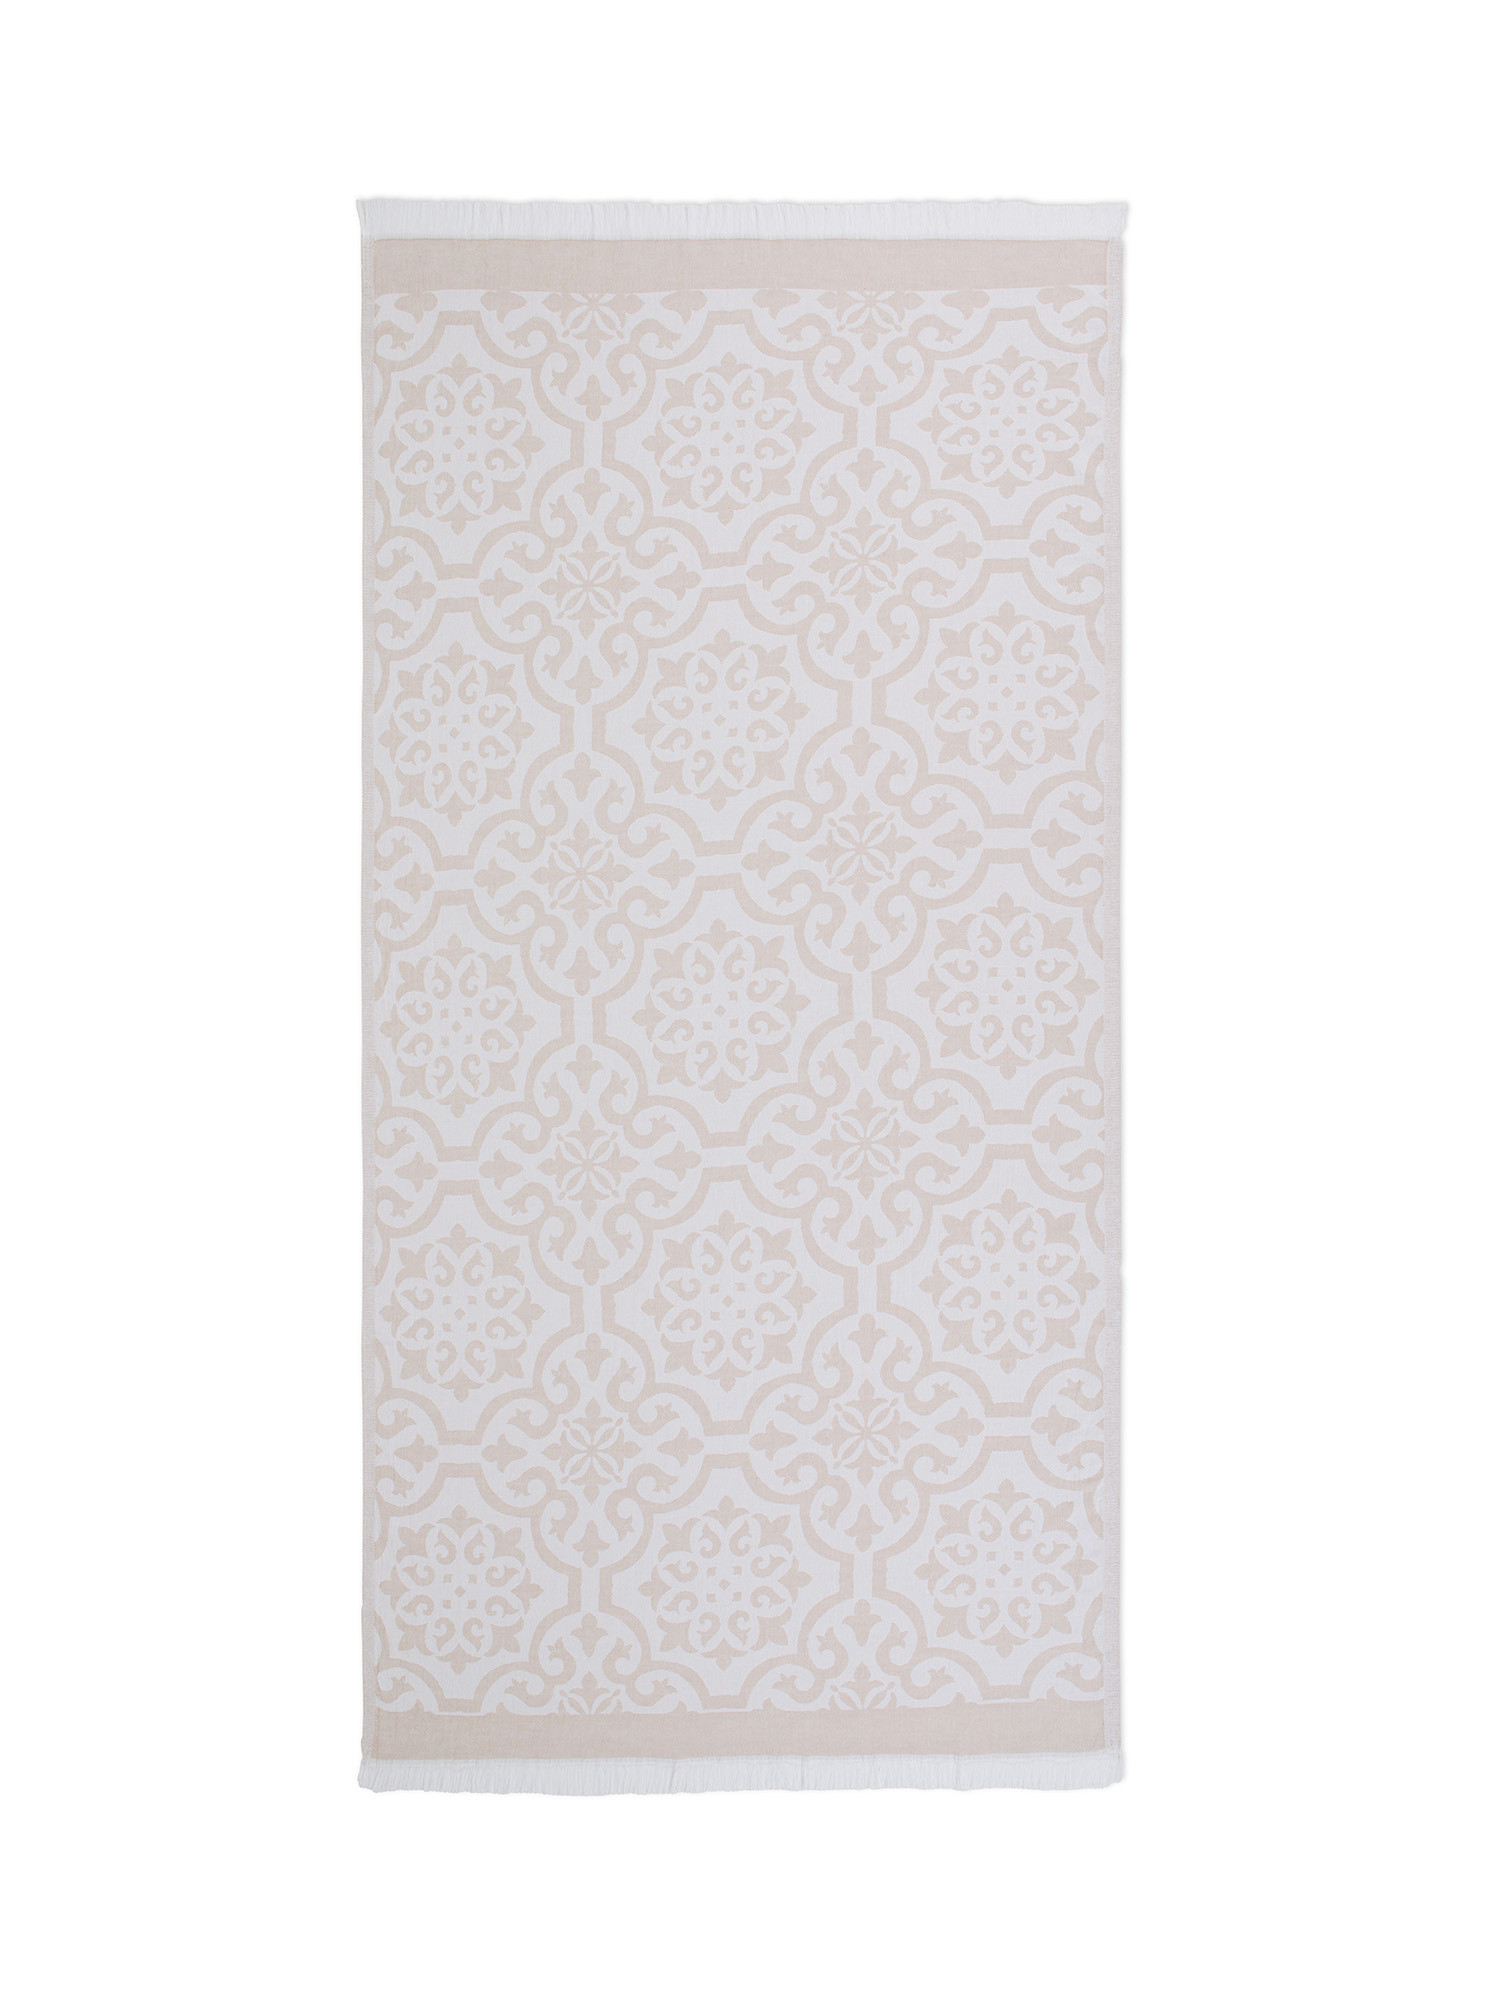 100% cotton hammam beach towel with geometric pattern, Beige, large image number 0